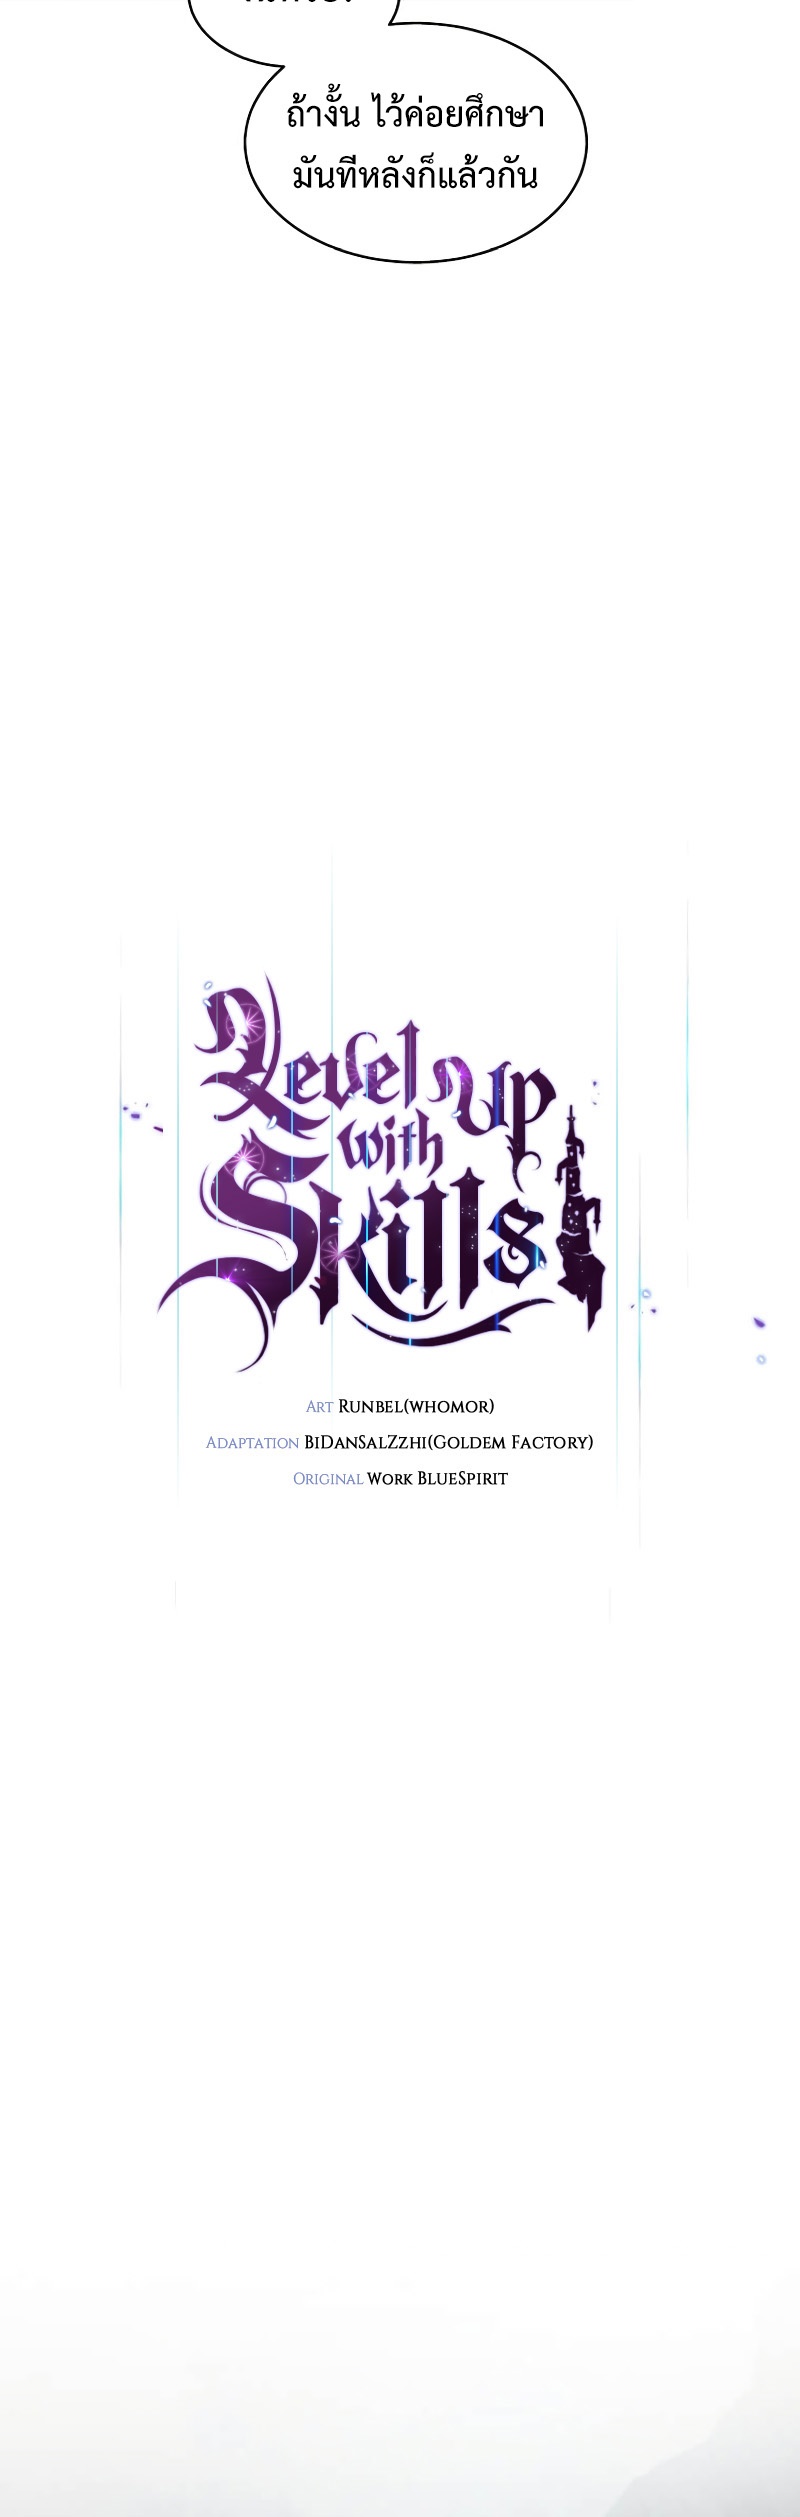 Level Up with Skills 59 (4)